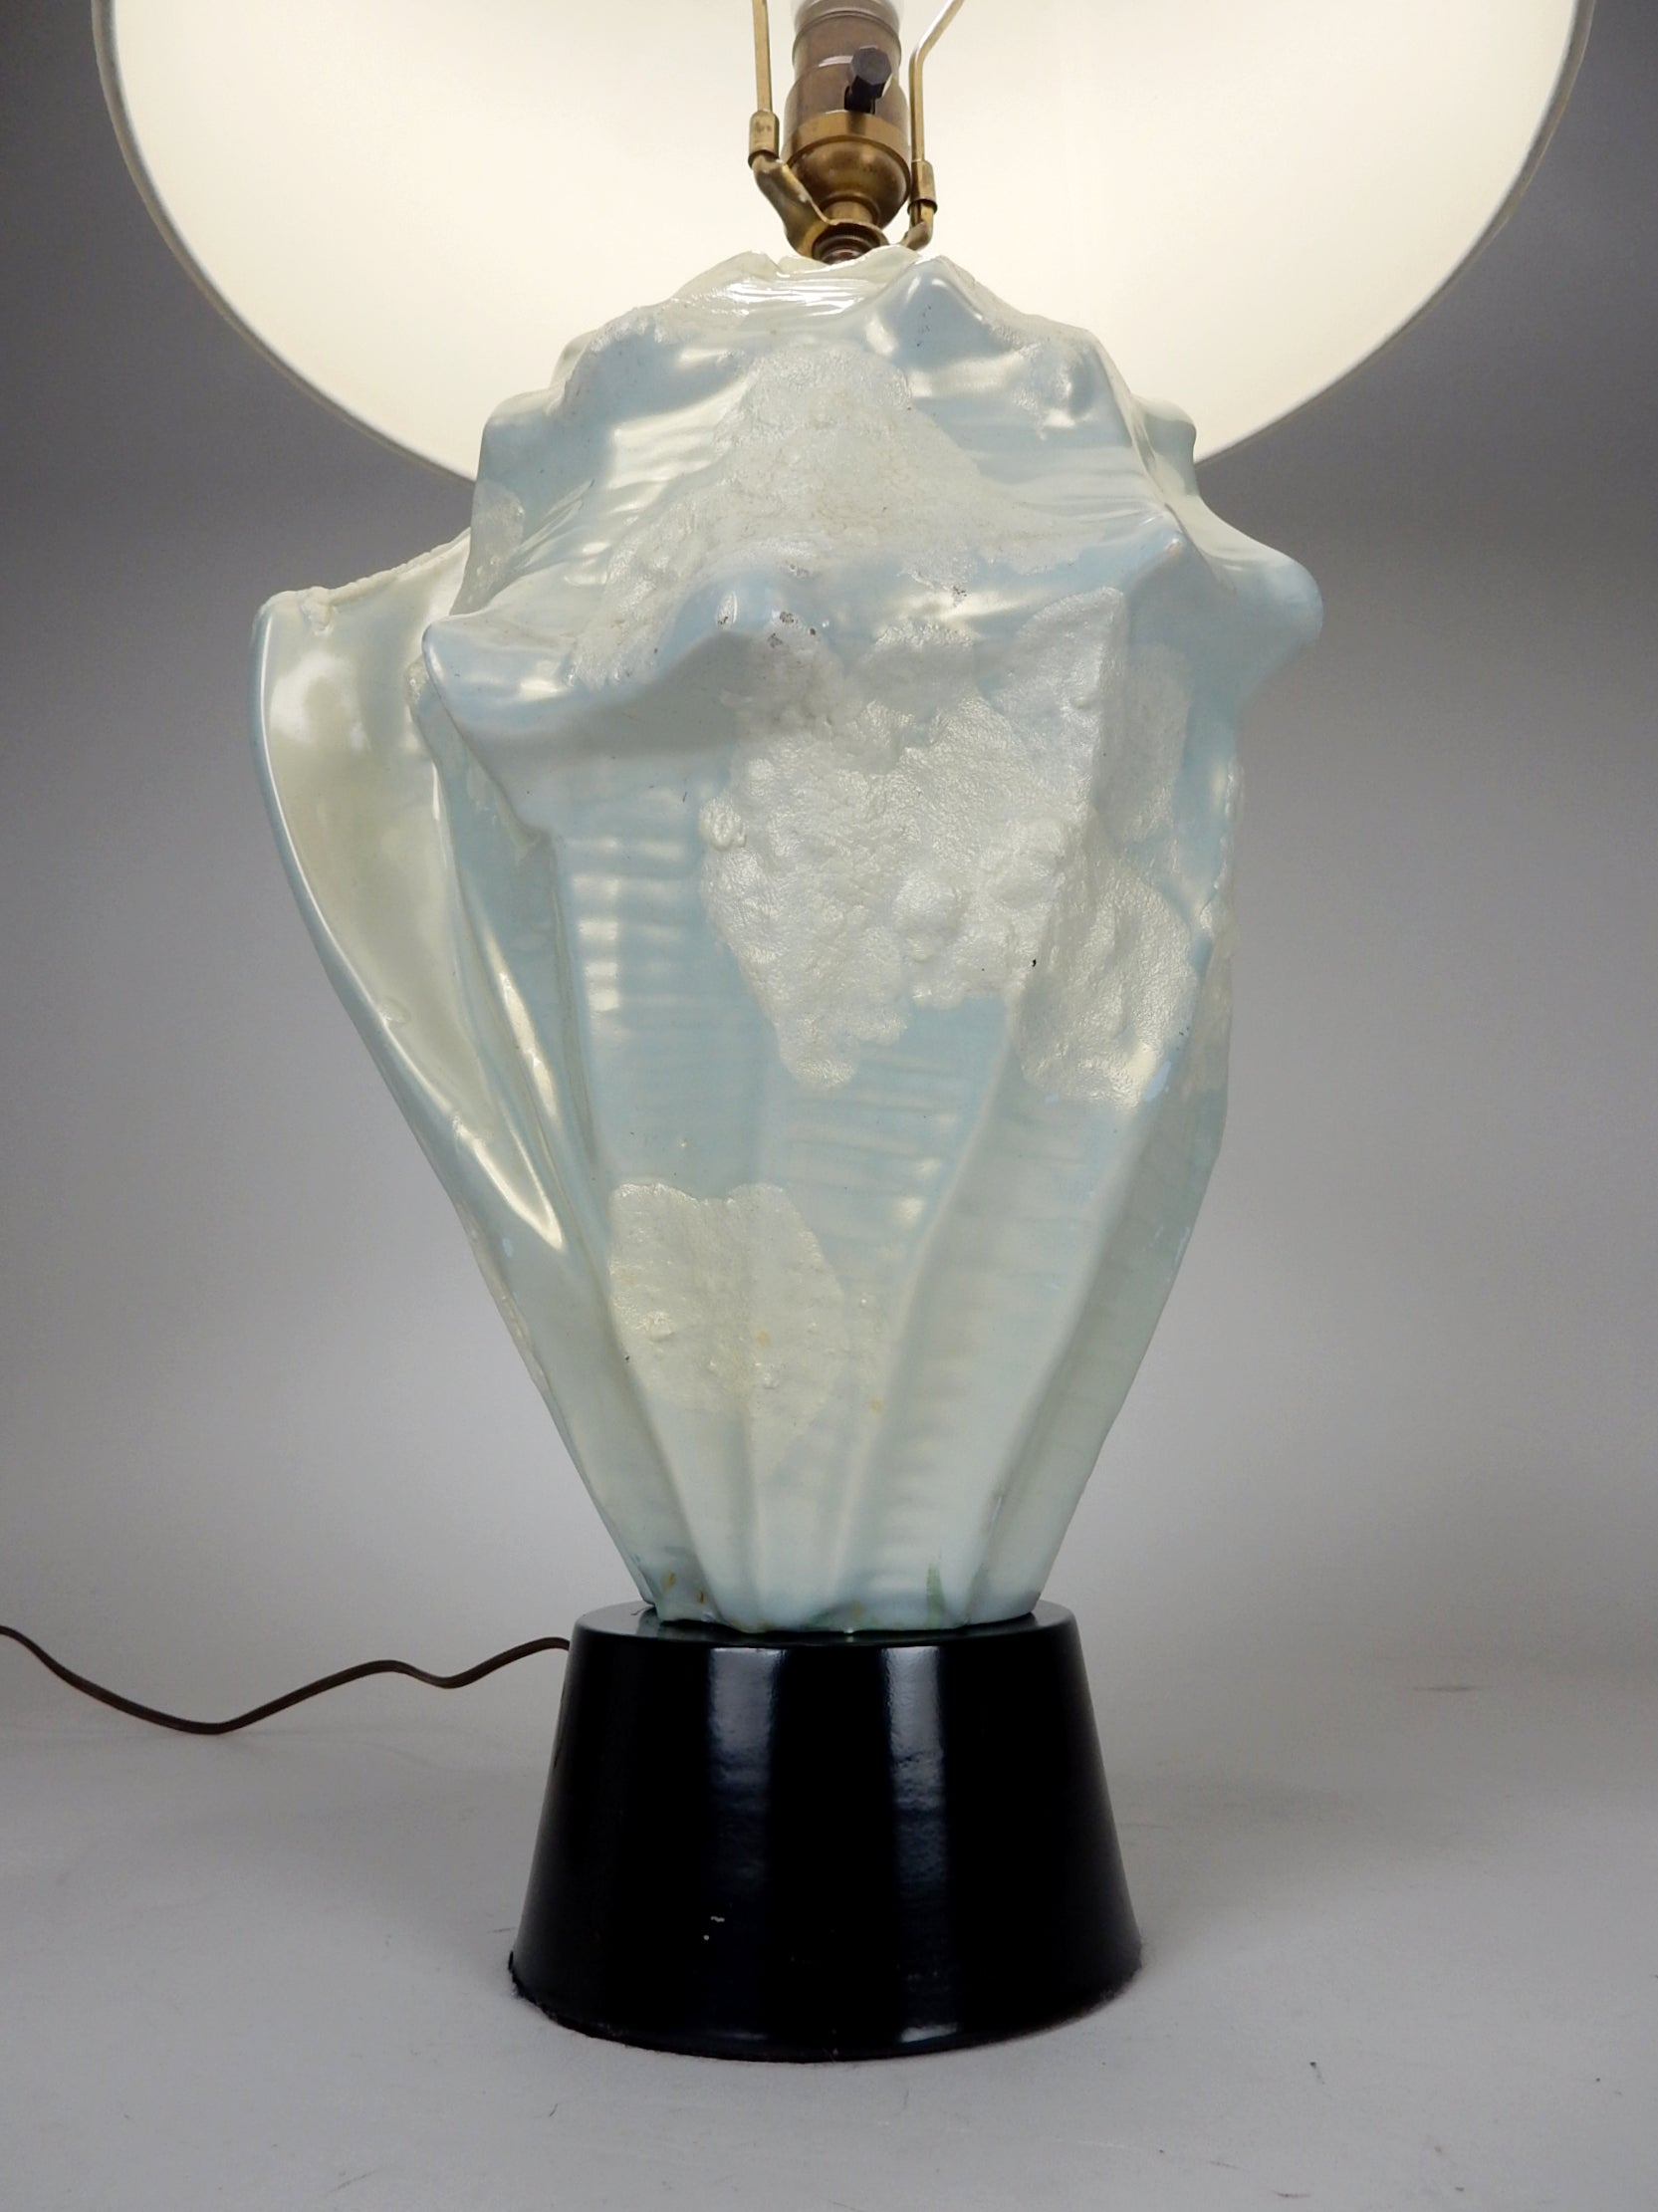 Ceramic Conch shell table lamp. This is really a stand out piece, gorgeous. 
Luminescent glaze makes it glow brilliant when lit.
Looks like a custom piece from circa 1960s judging by wiring and hardware. Black enamel metal base.
No damage, cracks